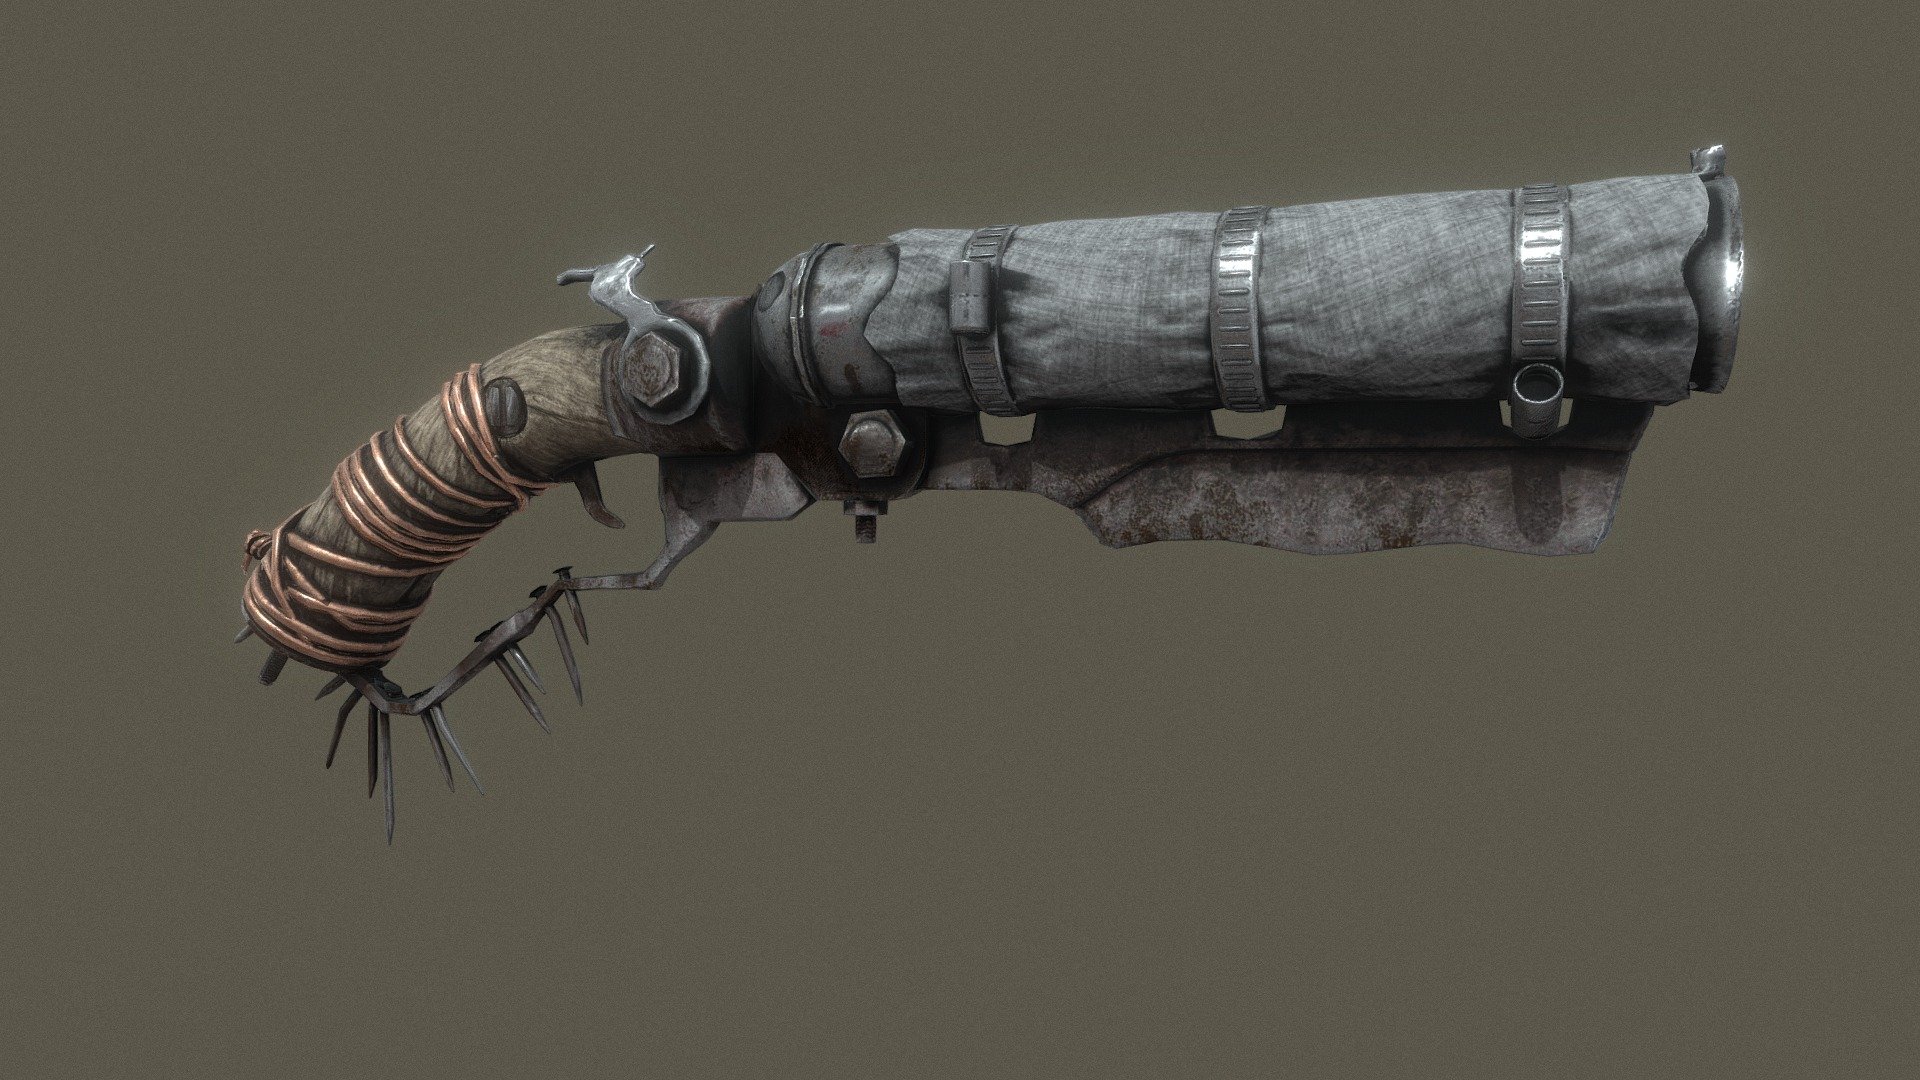 A steampunk-style weapon model for game engines.
A free model for your paid or free games 3d model